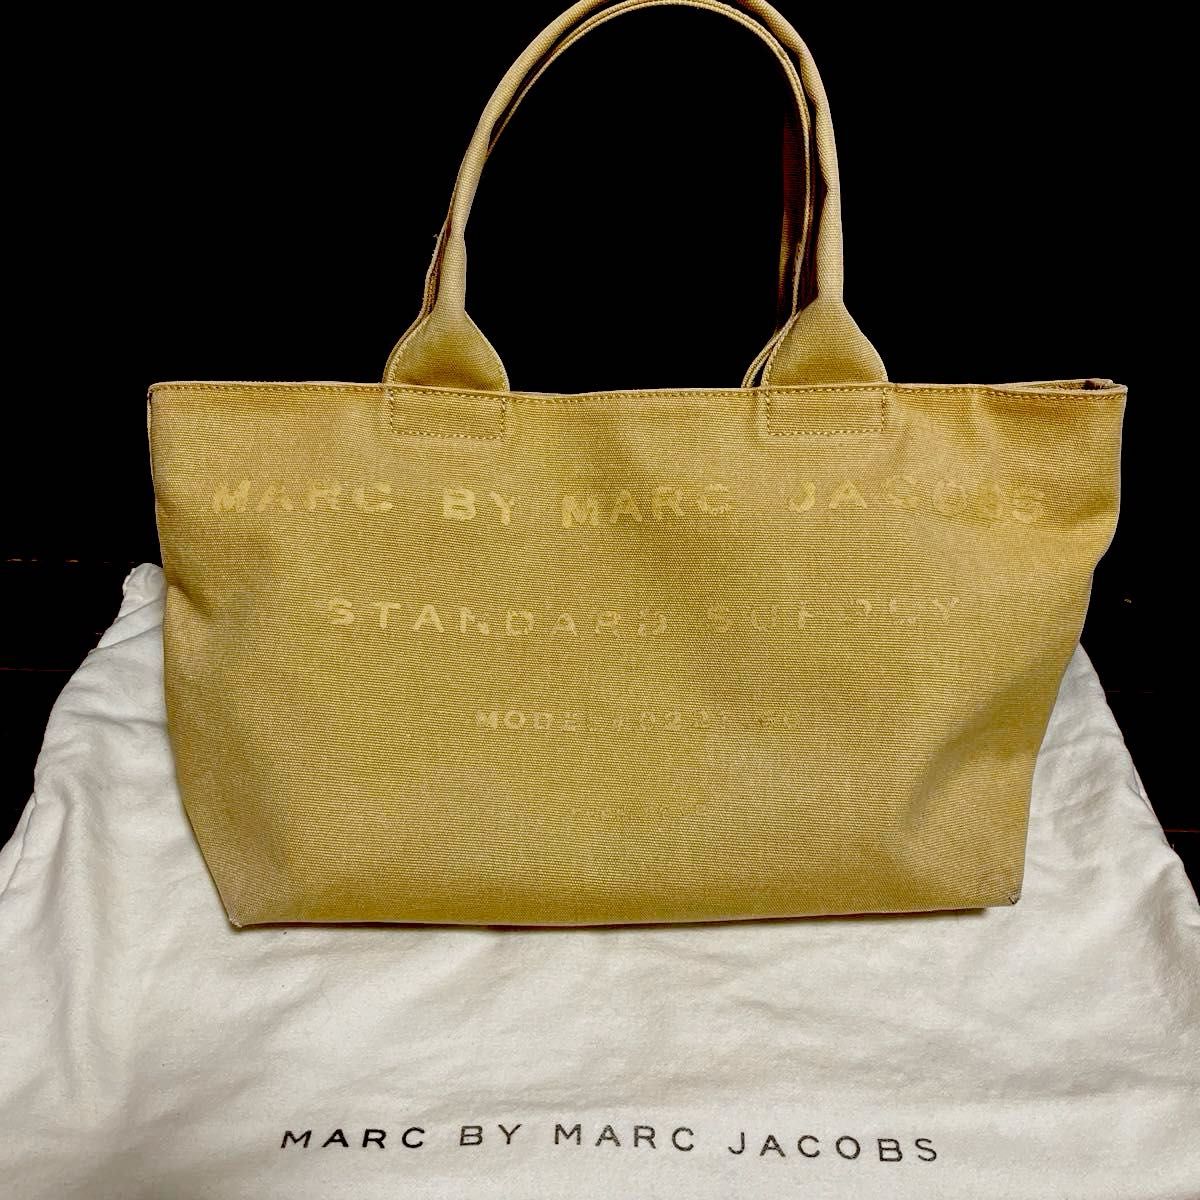 MARC BY MARC JACOBS（マークバイマークジェイコブス）トートバッグ